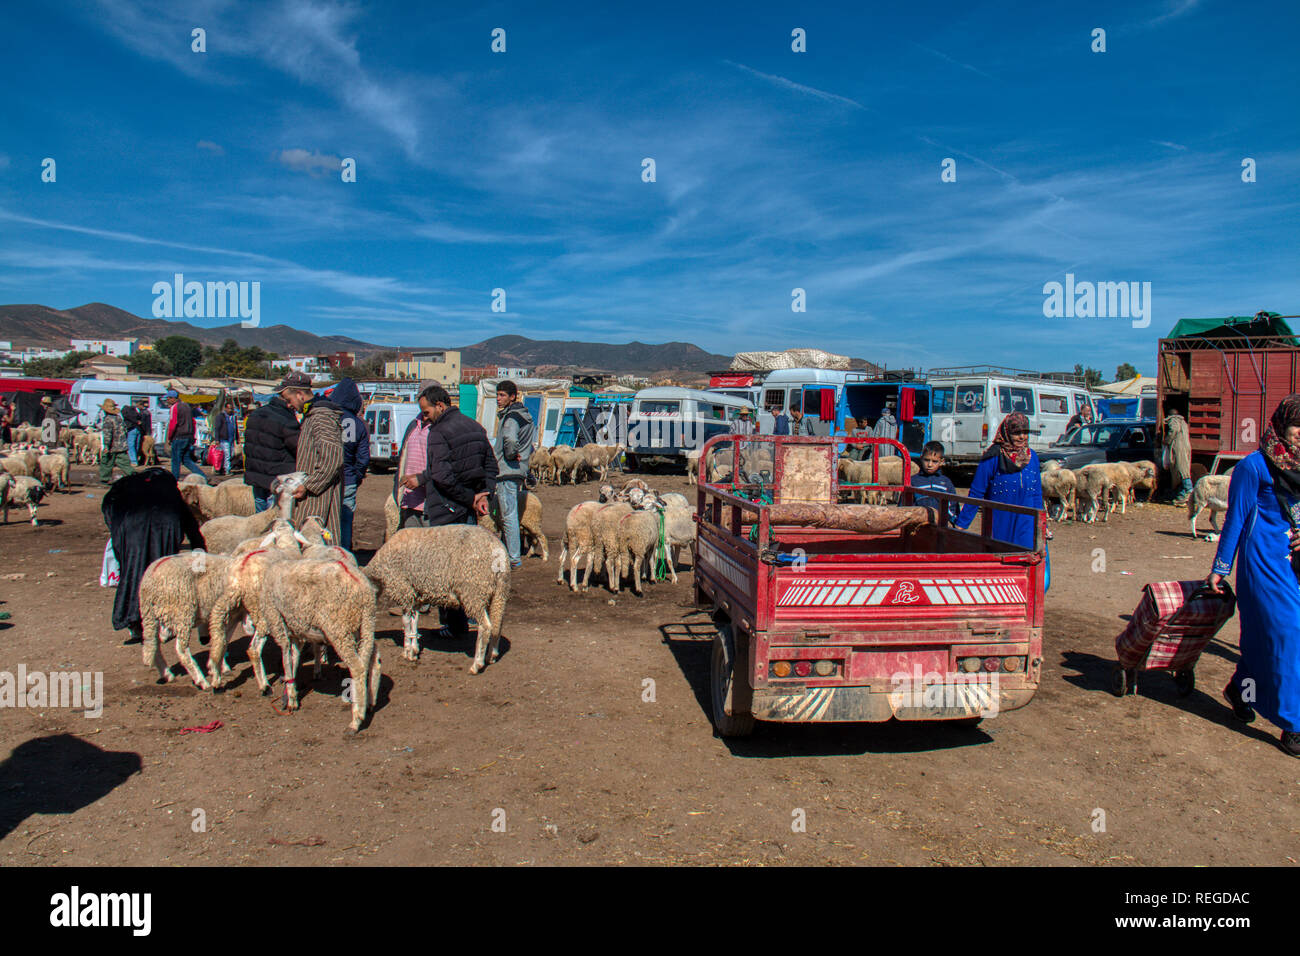 Oued Laou, Chefchaouen, Morocco - November 03, 2018: Every Saturday is celebrated in Oued Laou, a village in the province of Chaouen Stock Photo